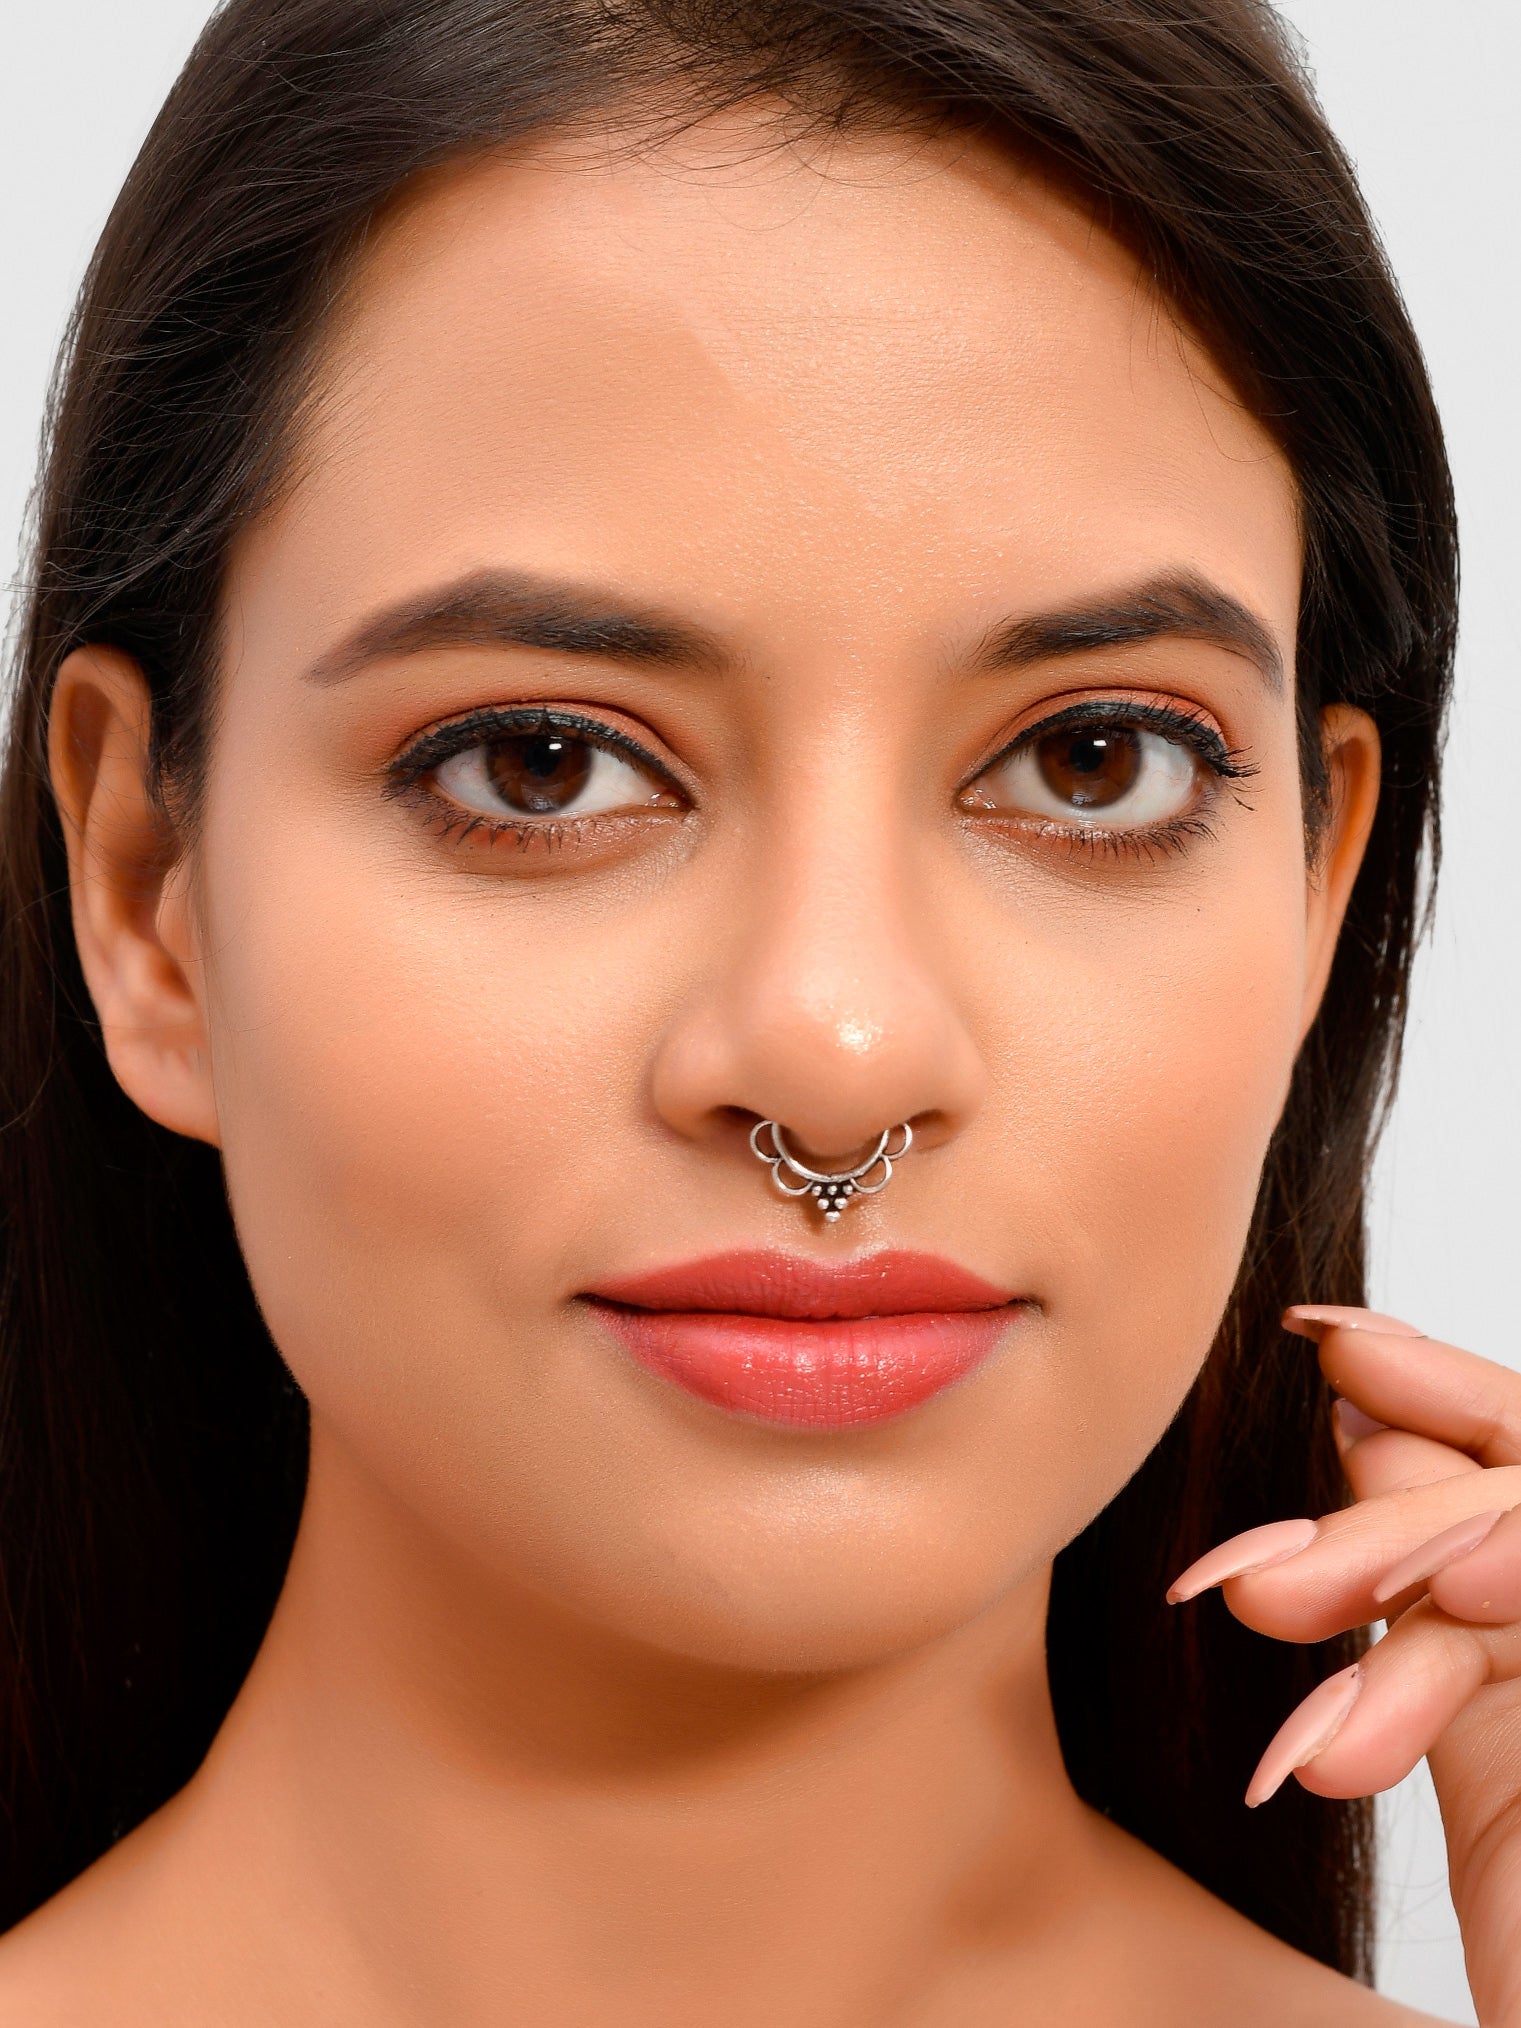 Buy Sterling Silver Septum, Nose Jewelry, Stone Septum, Silver Septum Ring, Silver  Nose Ring, Septum Silver, Septum Piercing, Tribal Septum Hoop Online in  India - Etsy